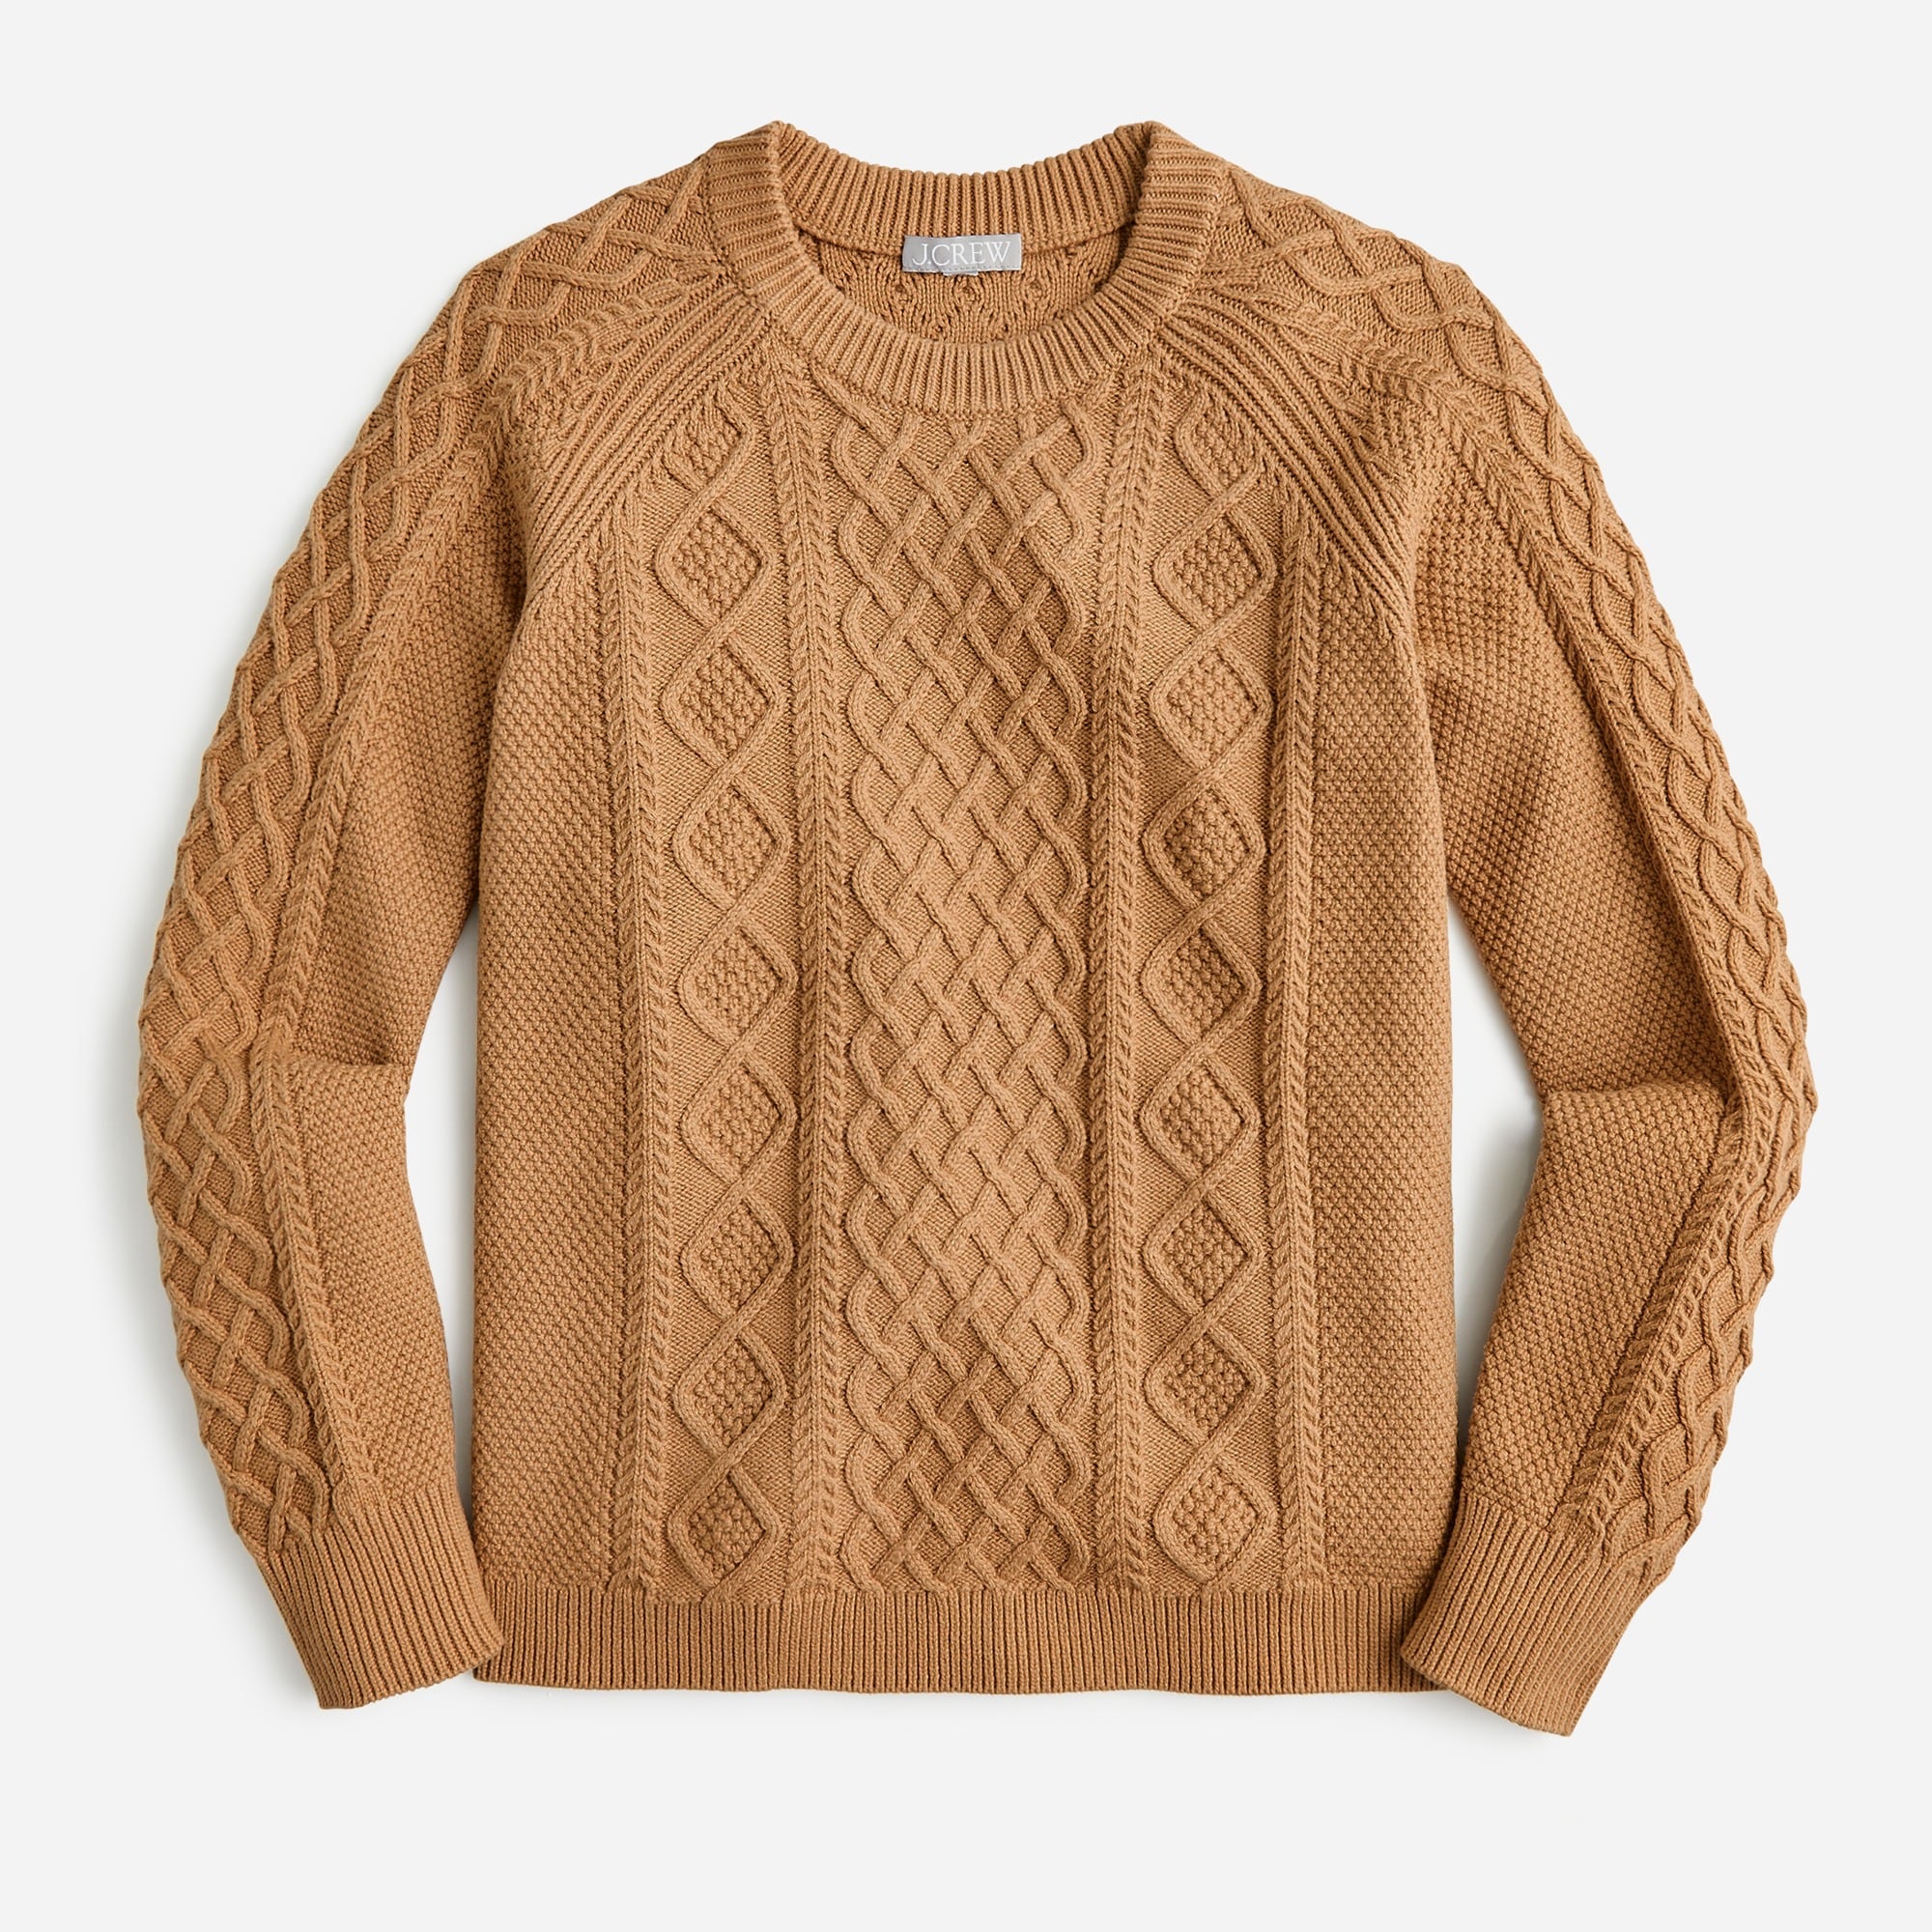 J.Crew: Cotton Cable-knit Sweater For Women